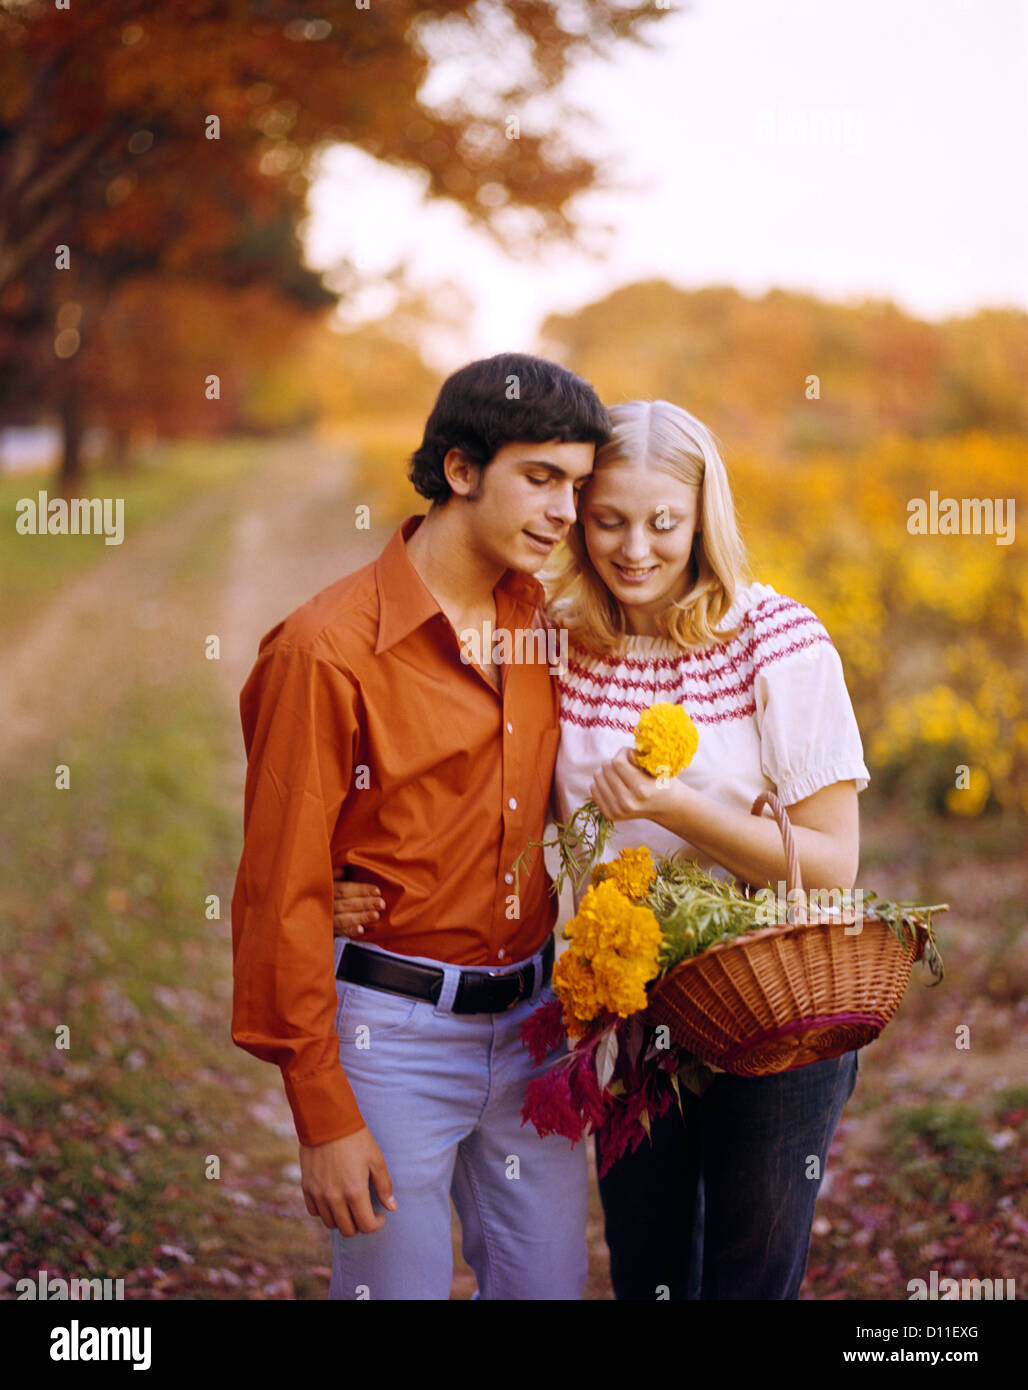 1970s AFFECTIONATE YOUNG COUPLE WITH BASKET OF FLOWERS ON AUTUMN COUNTRY ROAD Stock Photo